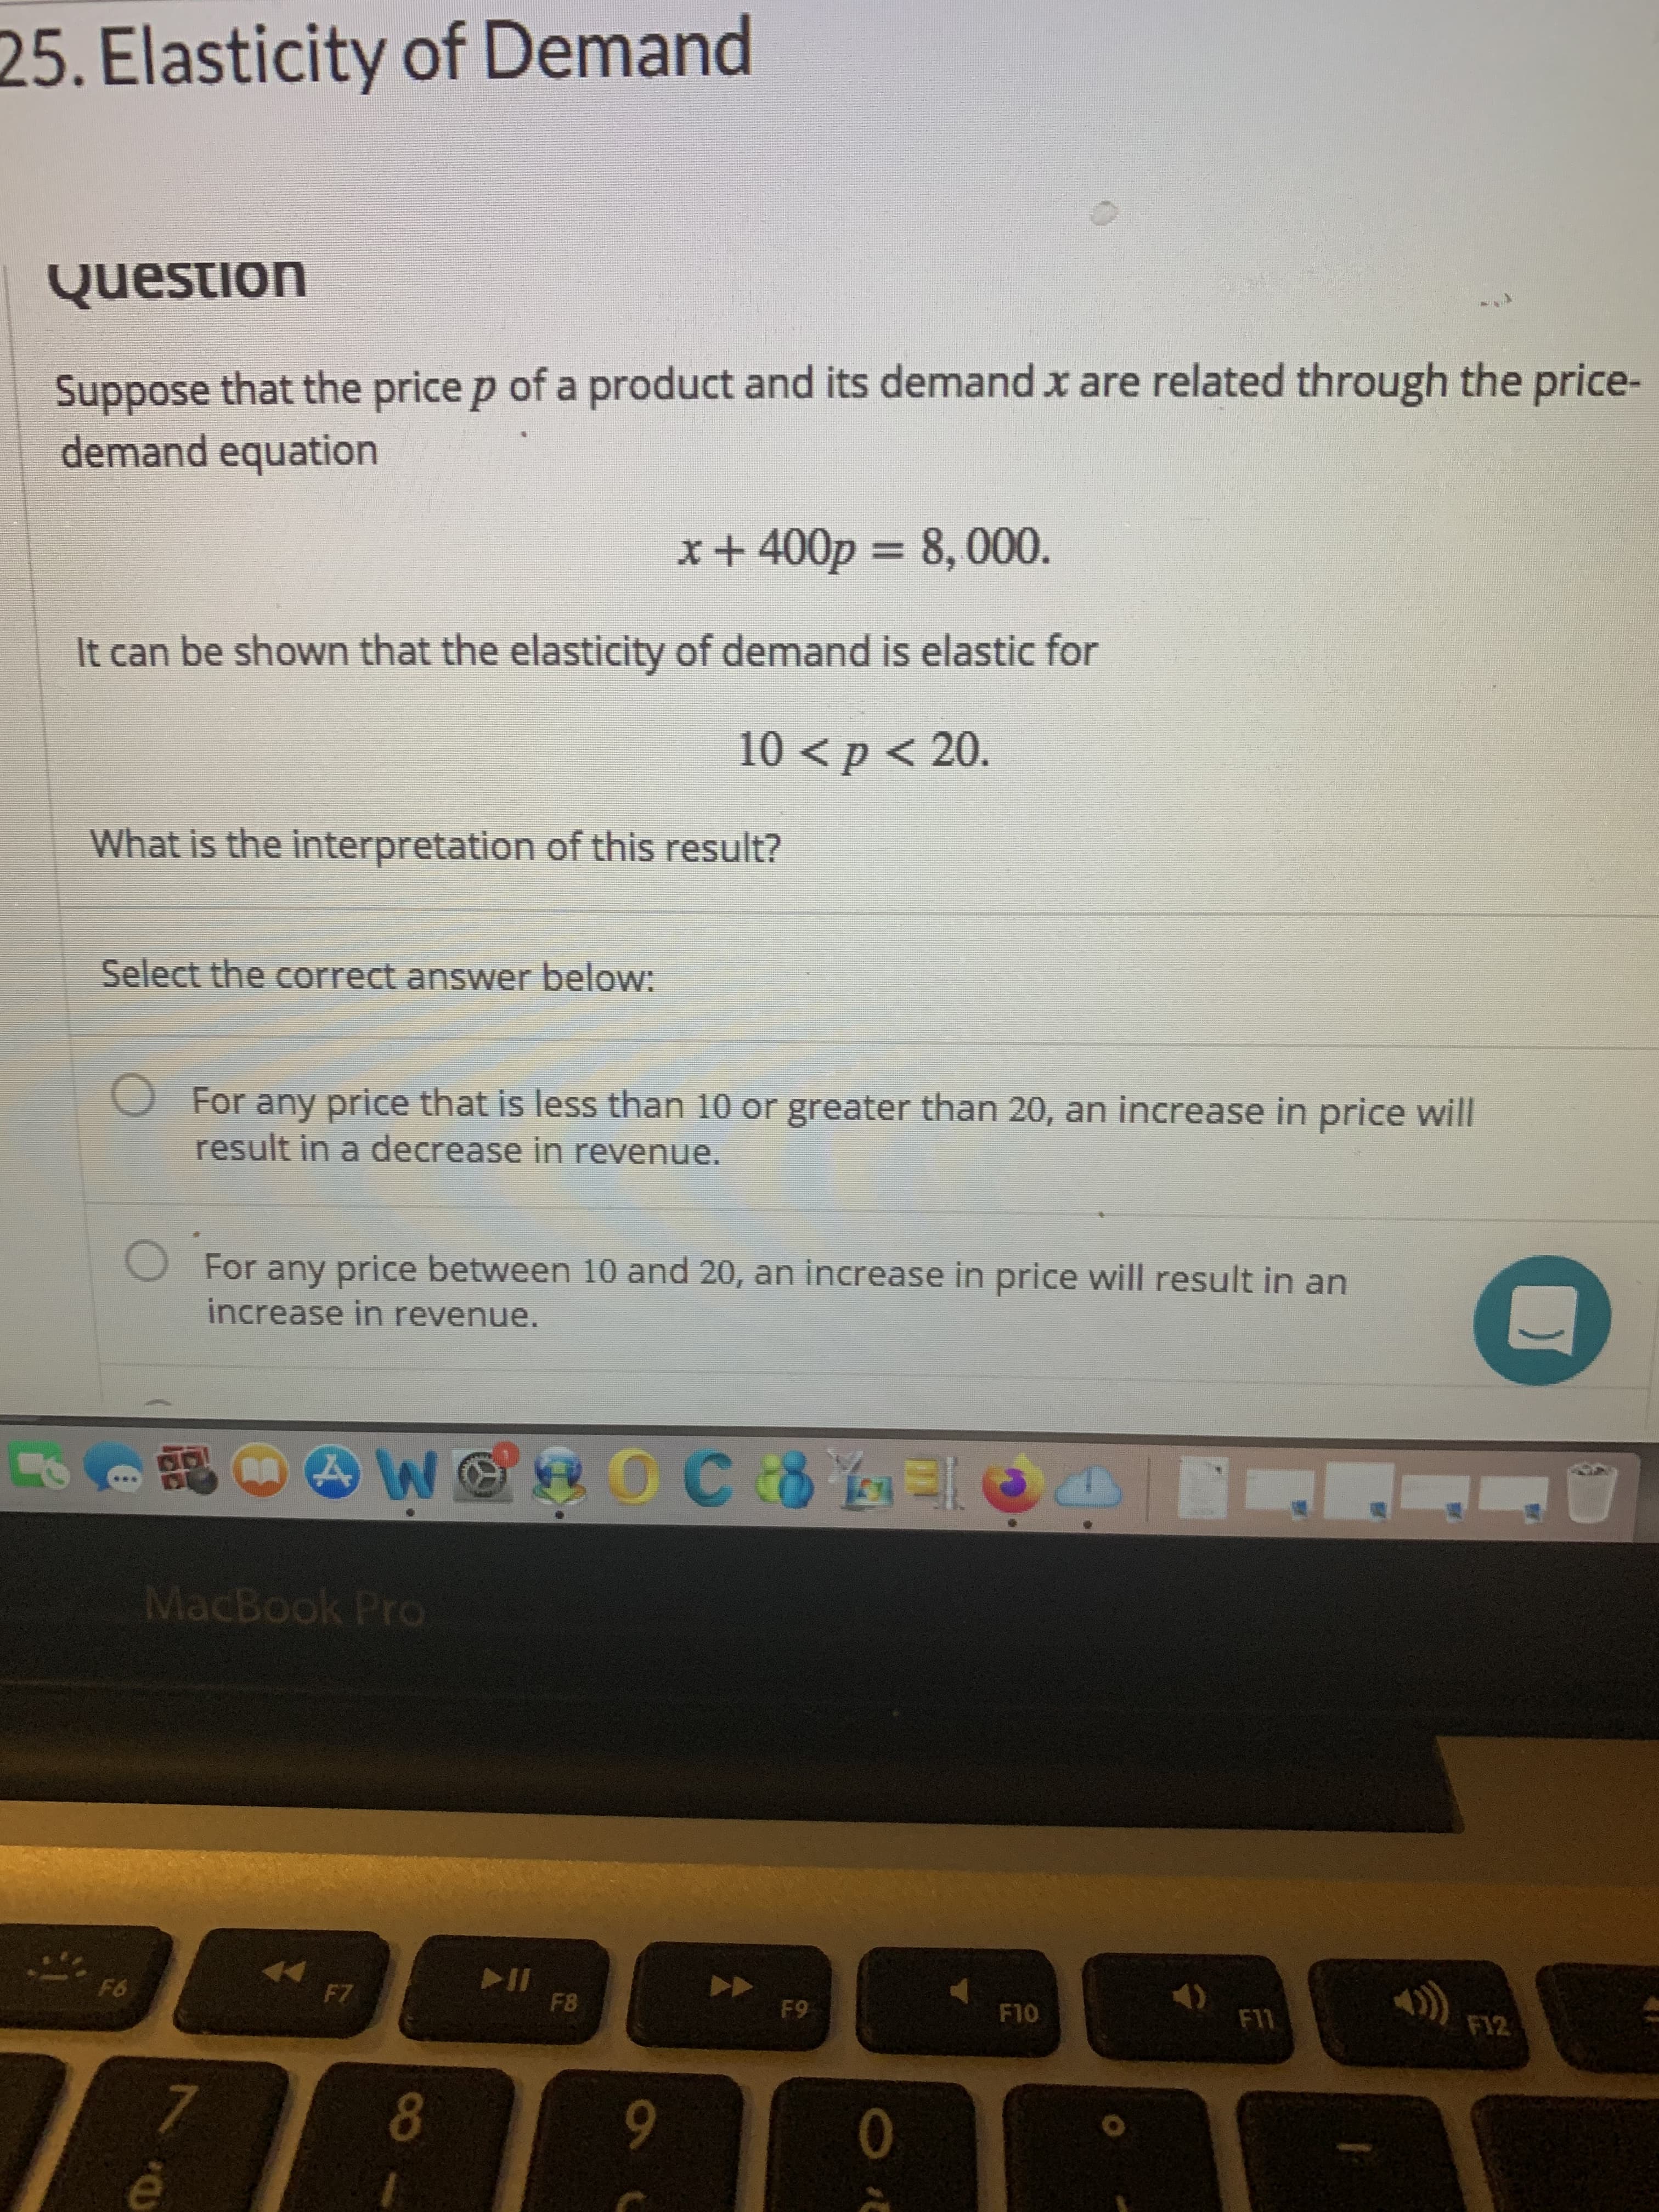 25. Elasticity of Demand
Question
Suppose that the price p of a product and its demand x are related through the price-
demand equation
x+400p = 8, 000.
It can be shown that the elasticity of demand is elastic for
10 <p < 20.
What is the interpretation of this result?
Select the correct answer below:
O For any price that is less than 10 or greater than 20, an increase in price will
result in a decrease in revenue.
O For any price between 10 and 20, an increase in price will result in an
increase in revenue.
MacBook Pro
F6
F7
FB
F9
F10
F11
F12
9-
8.
